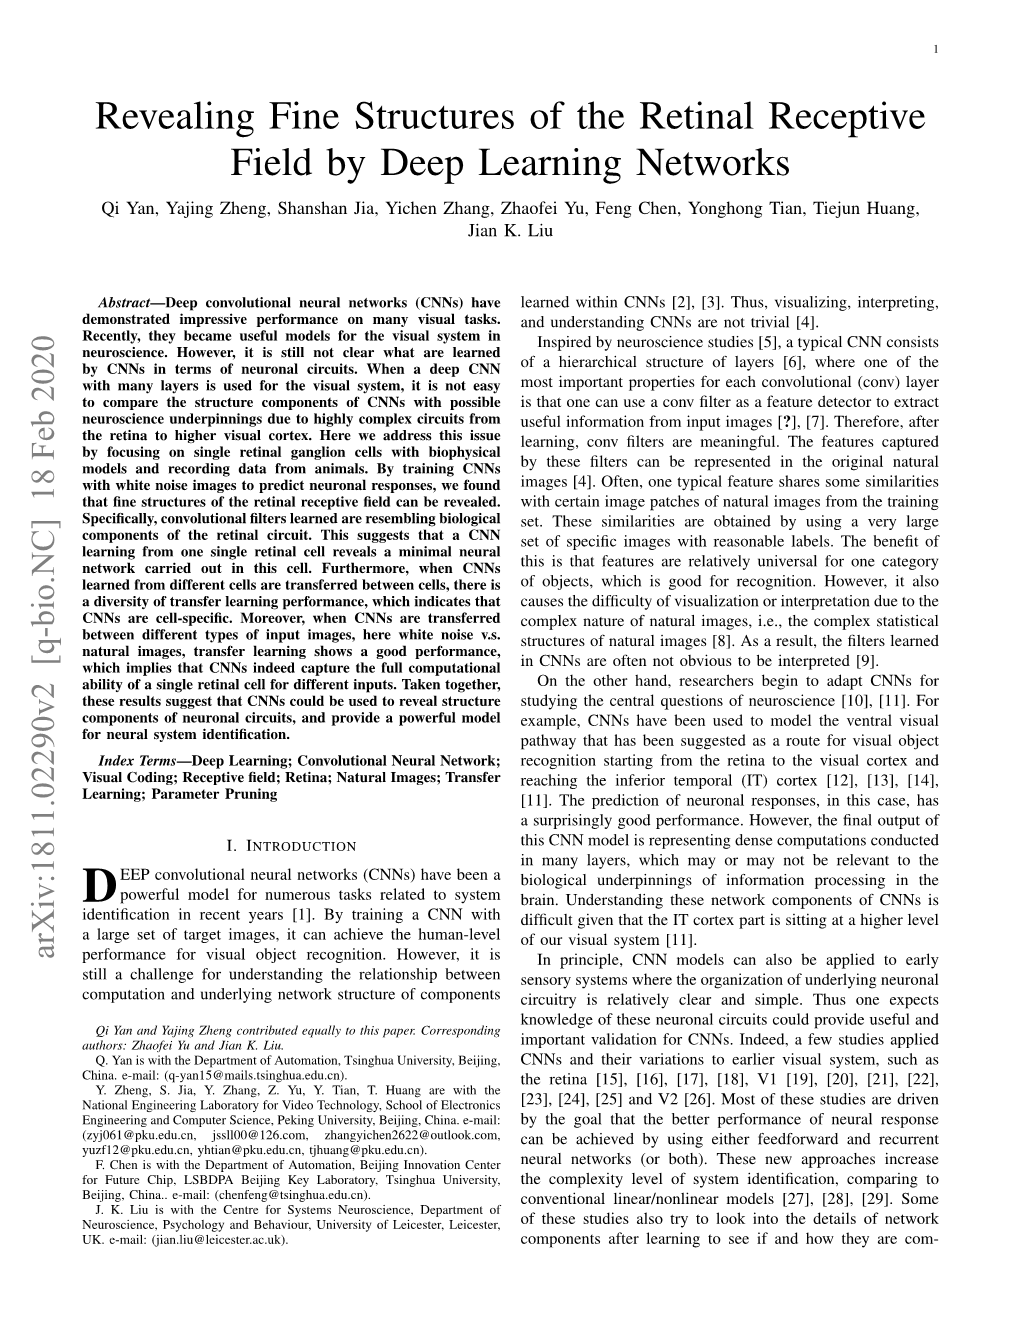 Revealing Fine Structures of the Retinal Receptive Field by Deep Learning Networks